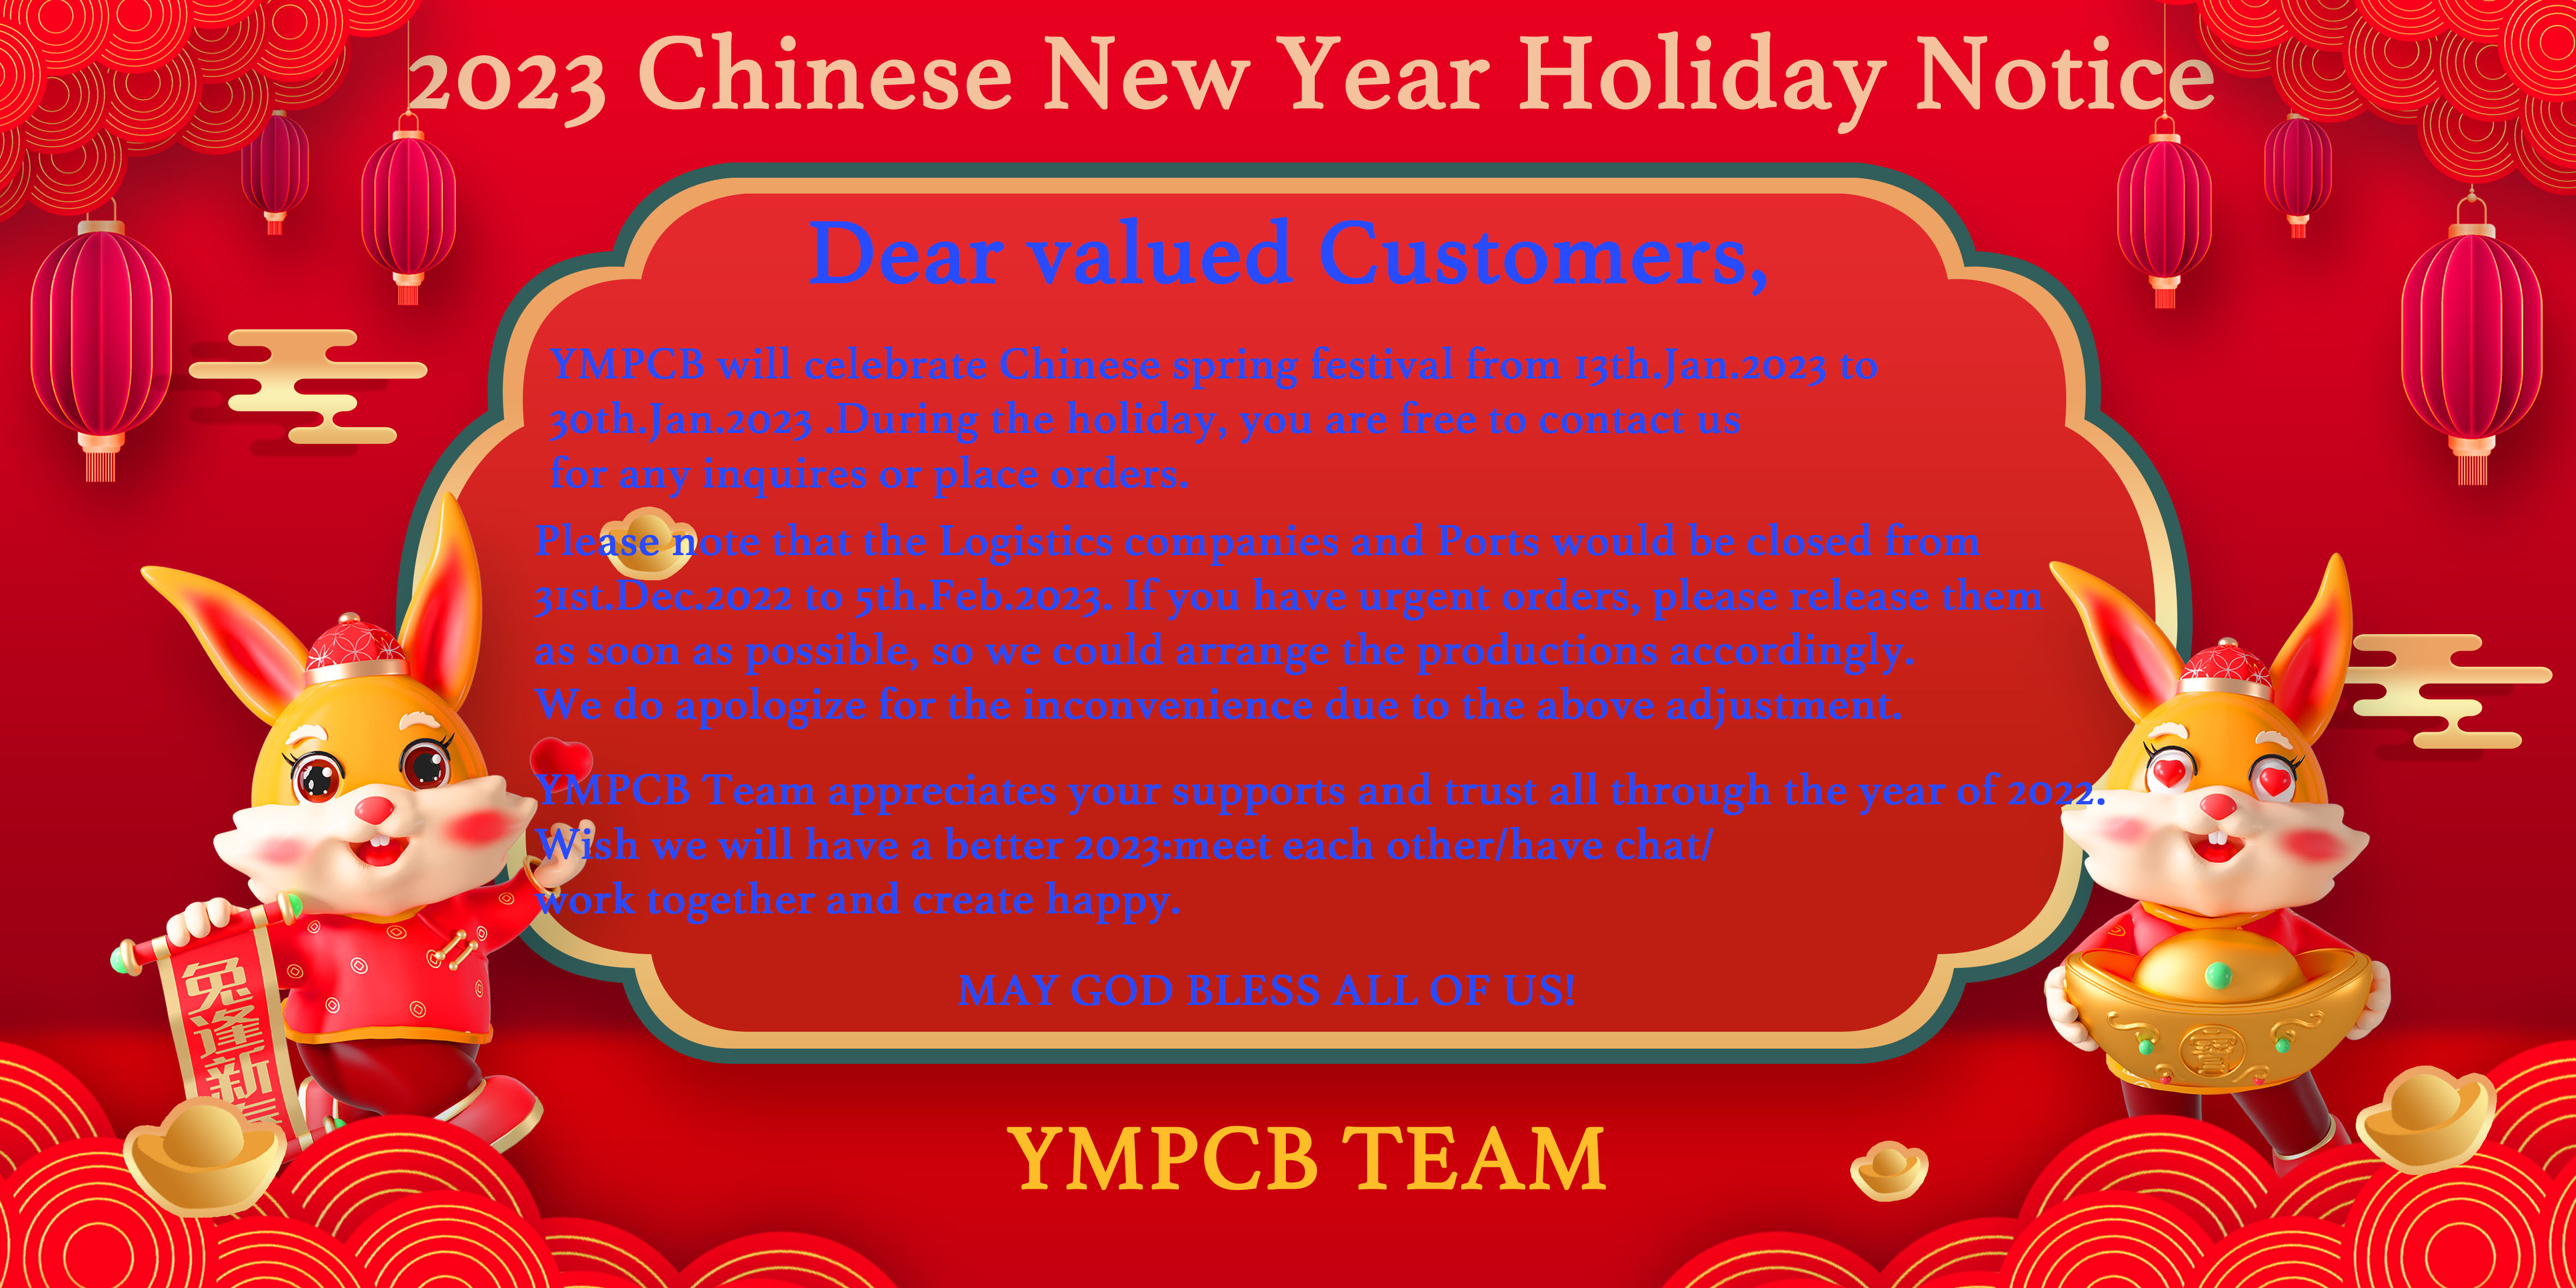 Holiday Notice-2023 Chinese New Year